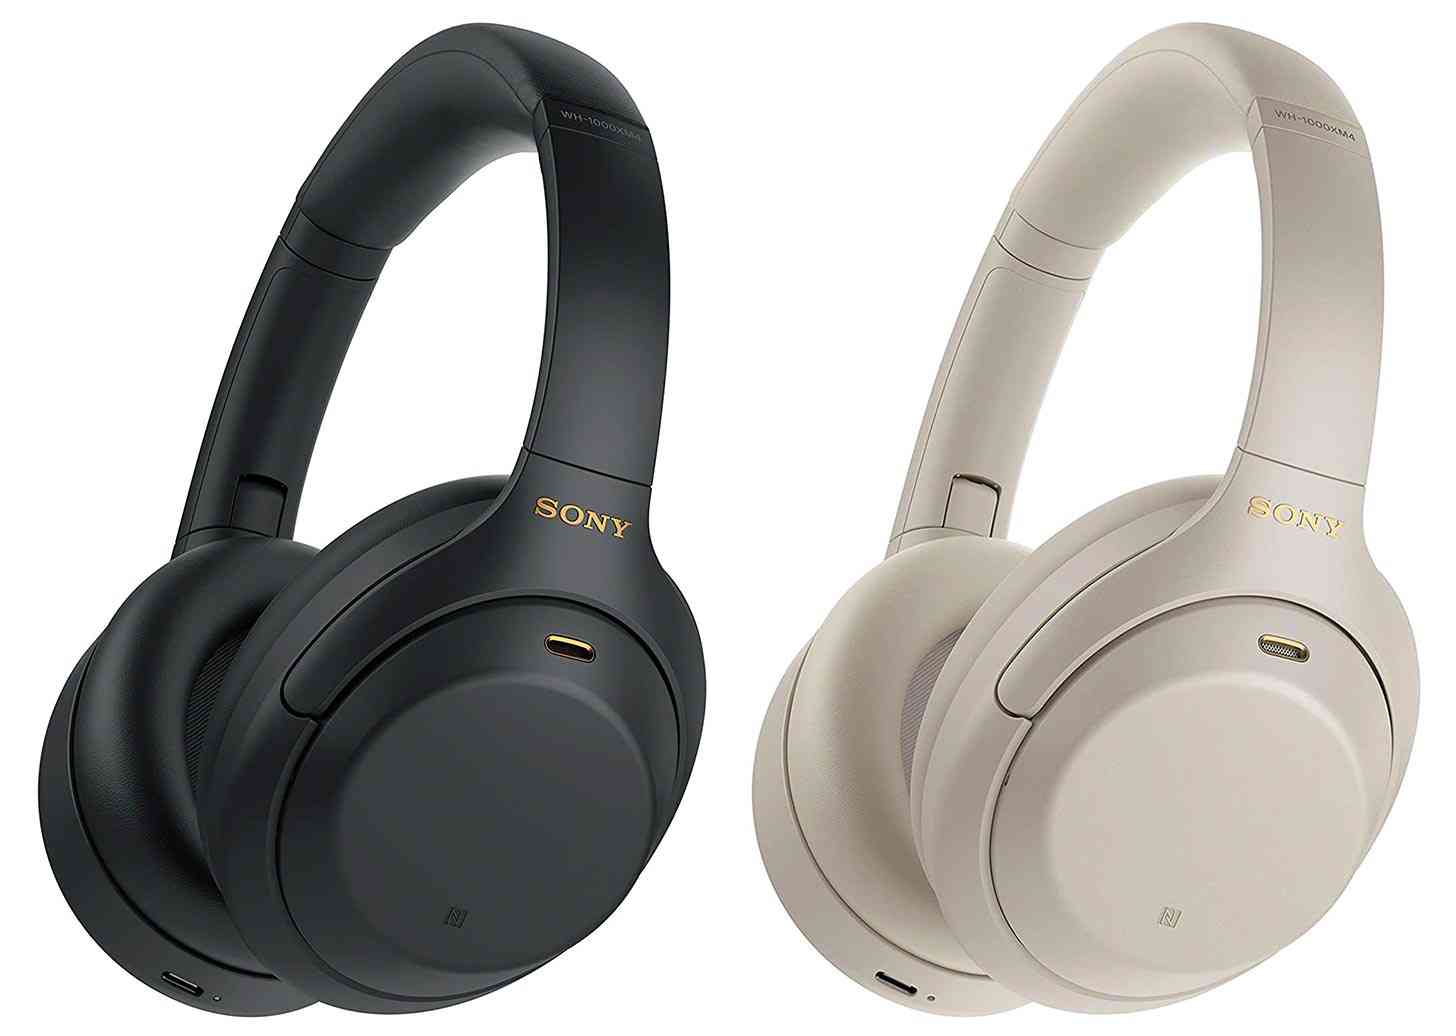 Sony WH-1000XM4 headphones official with better noise canceling, multi